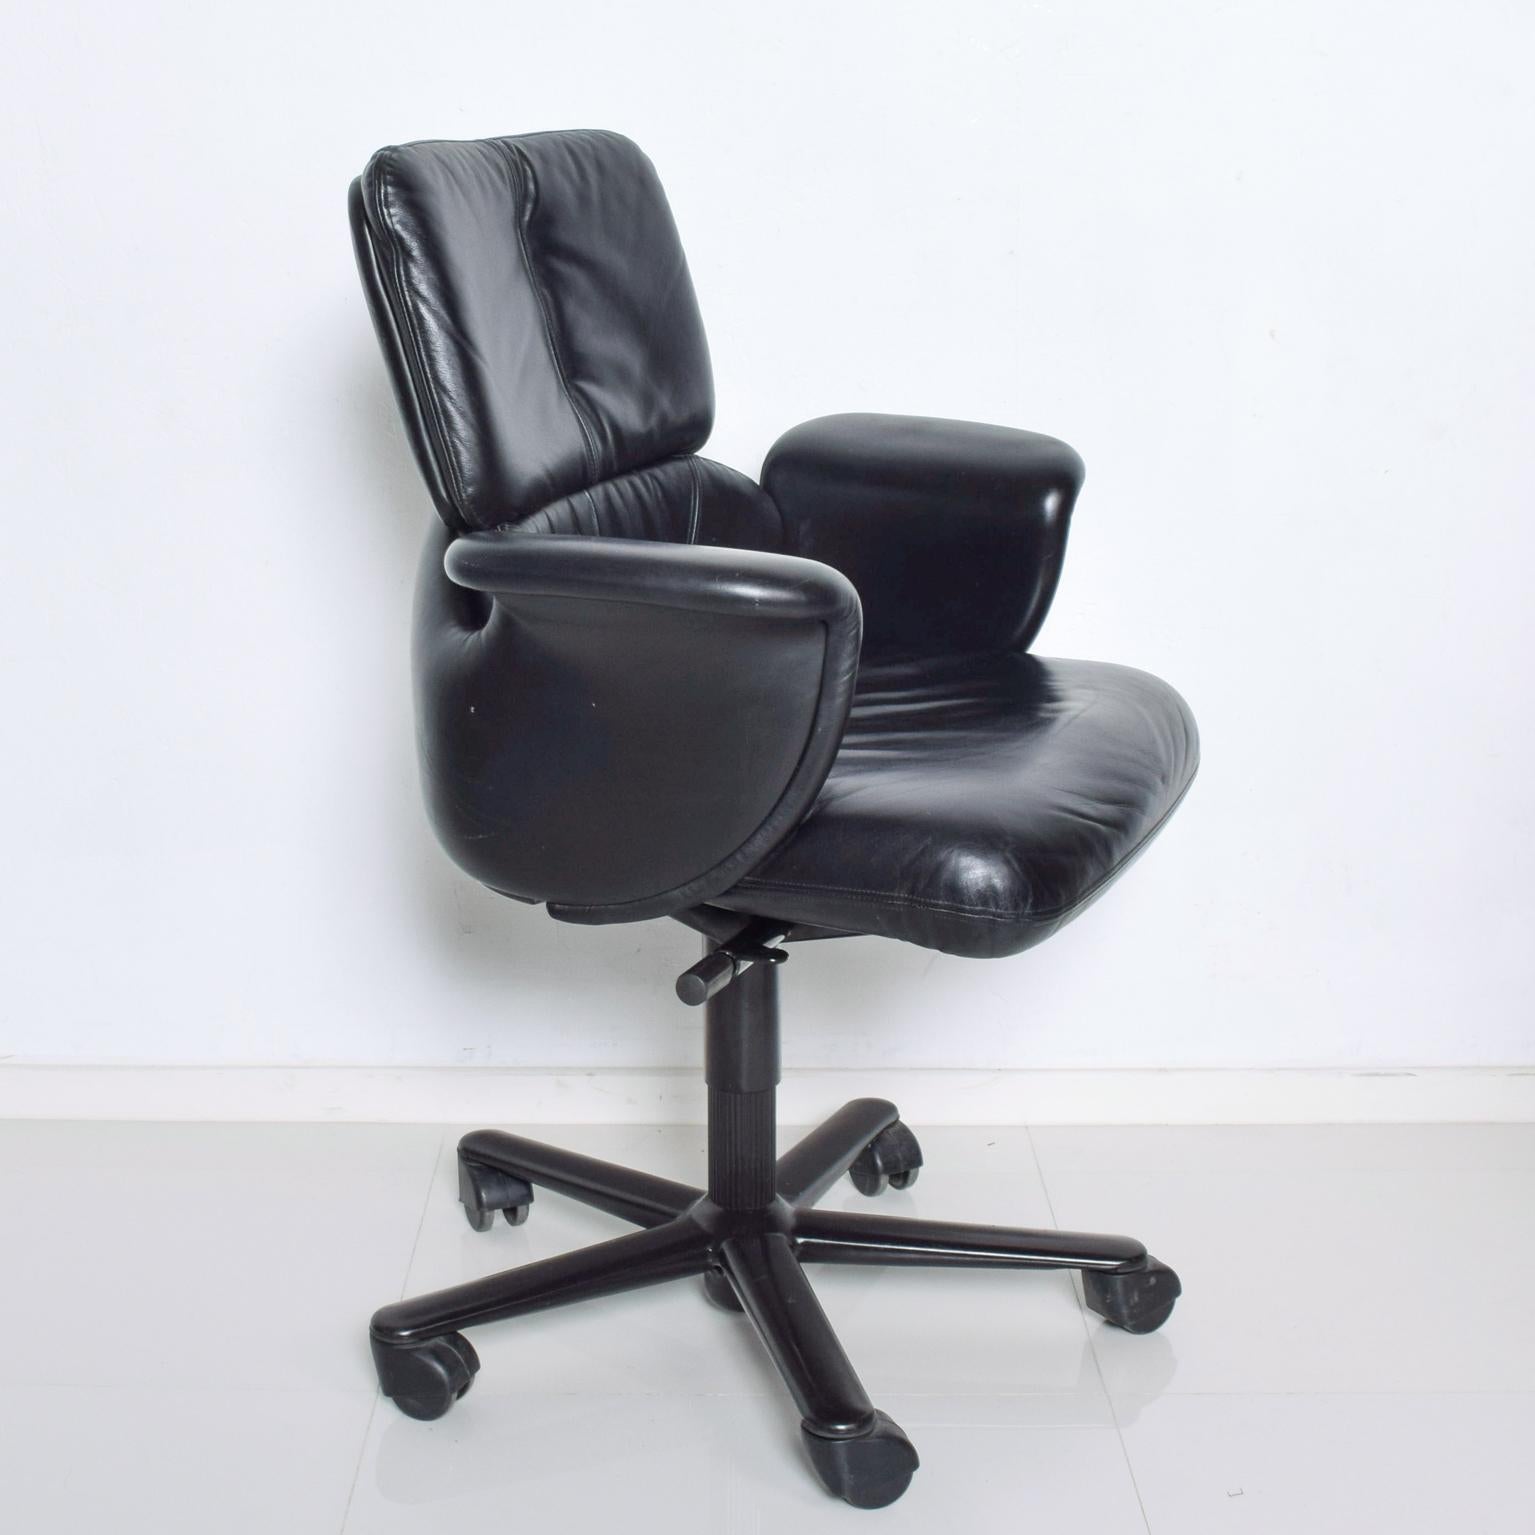 American  Modern Geoff Hollington for Herman Miller, Executive Black Leather Office Chair